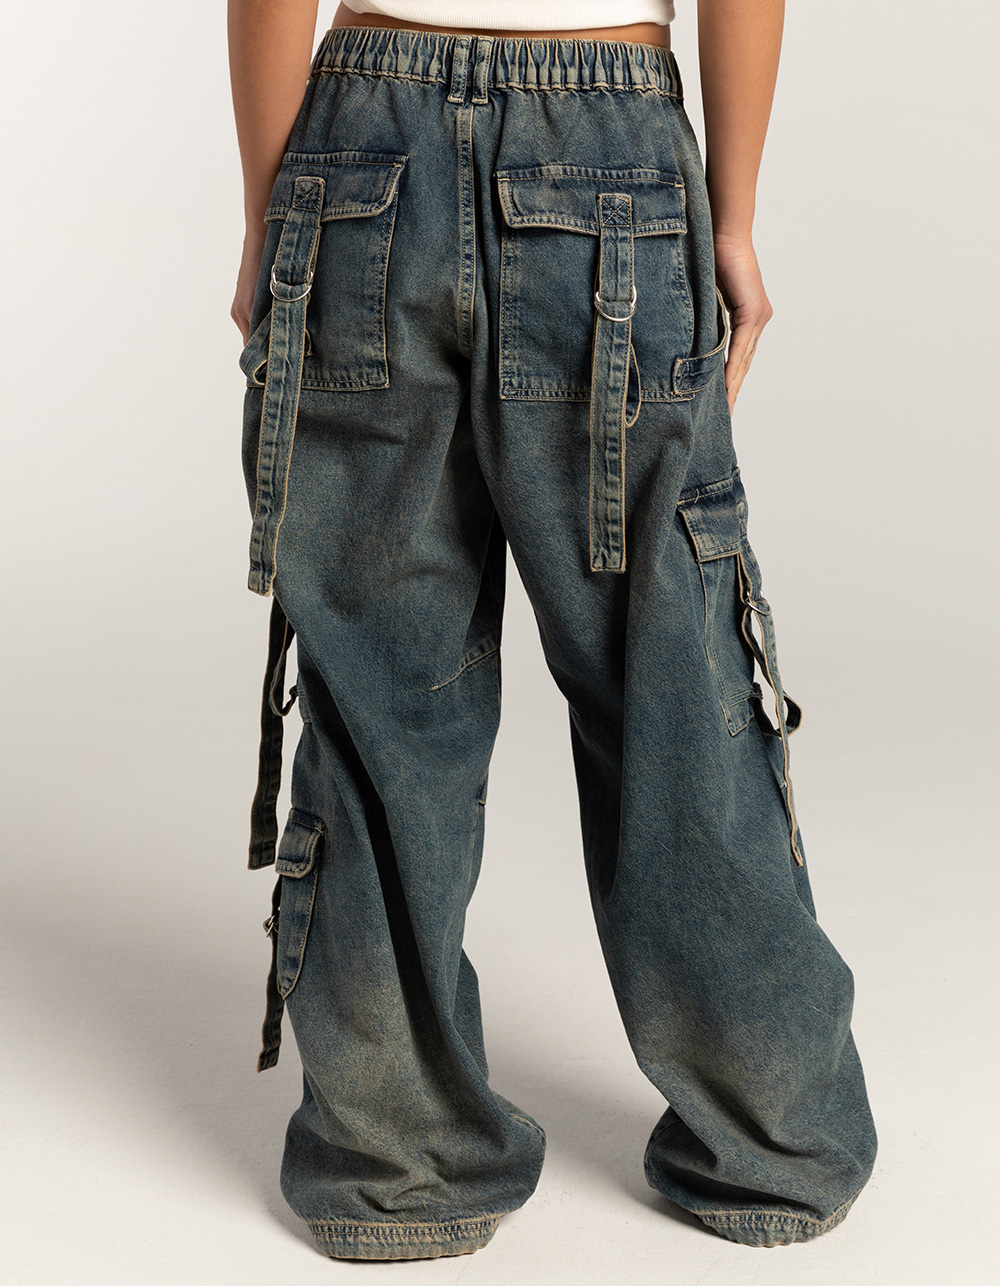 BDG Urban Outfitters Strappy Baggy Womens Cargo Pants - VINTAGE | Tillys